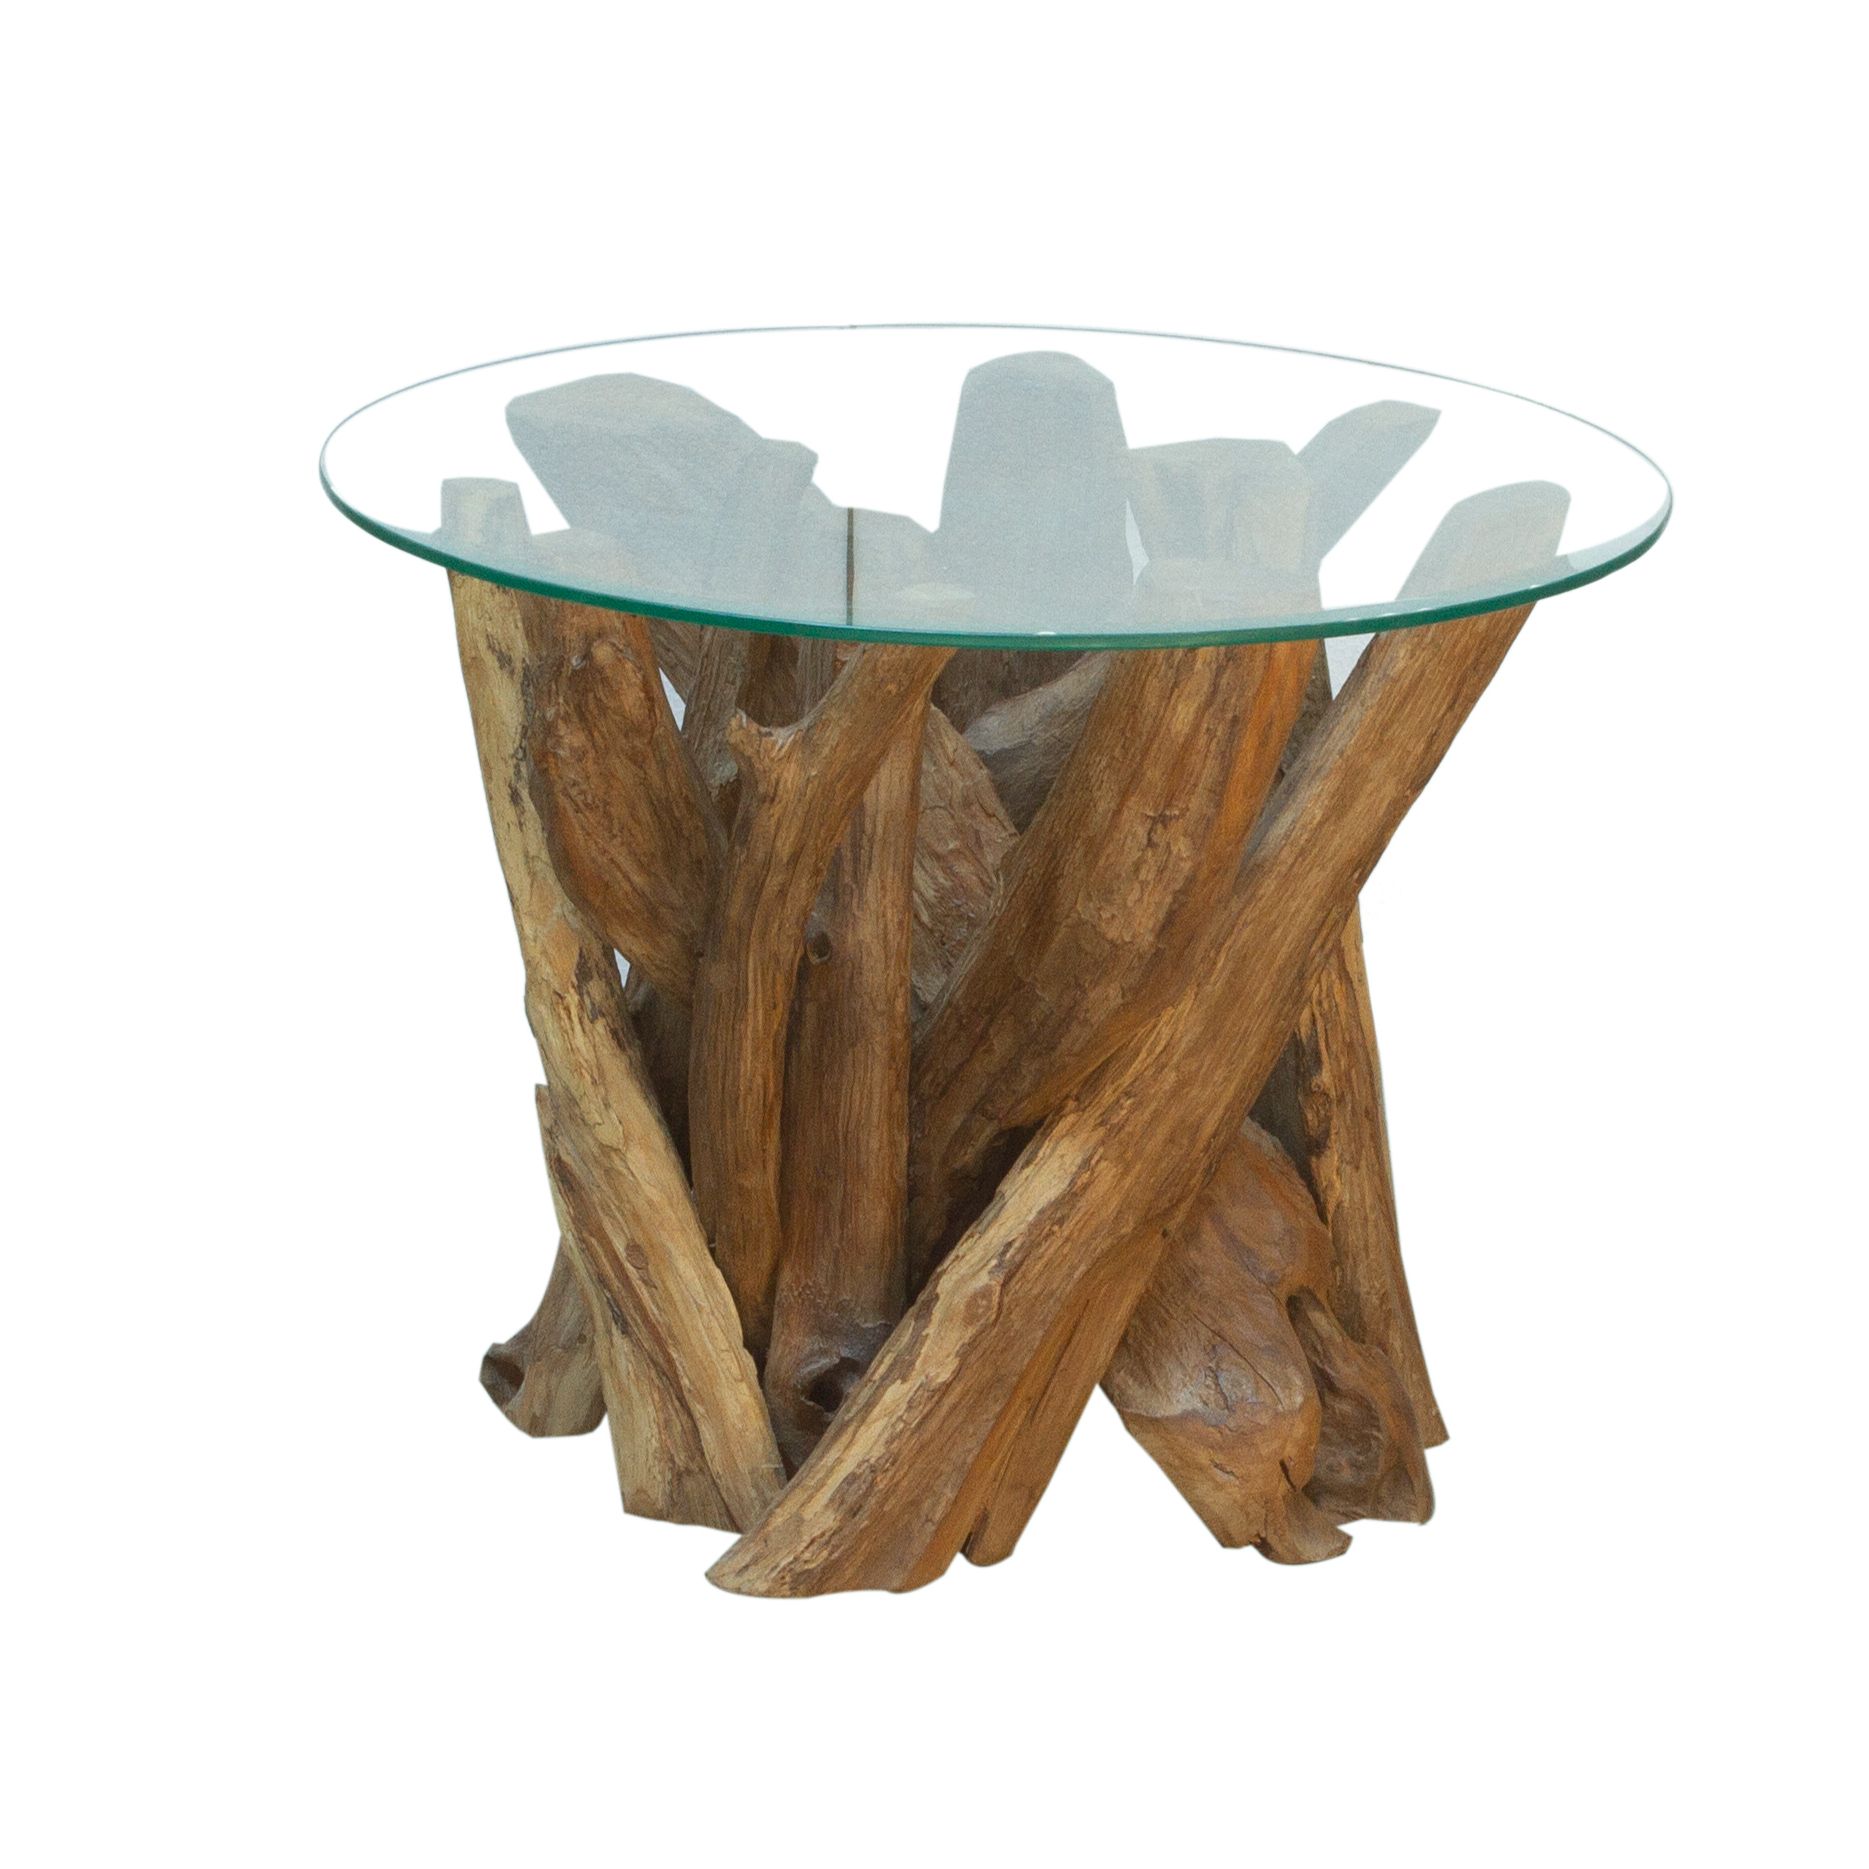 Ashdown Natural Teak Root Round Coffee Table With Glass Within Current Light Natural Drum Coffee Tables (View 11 of 20)